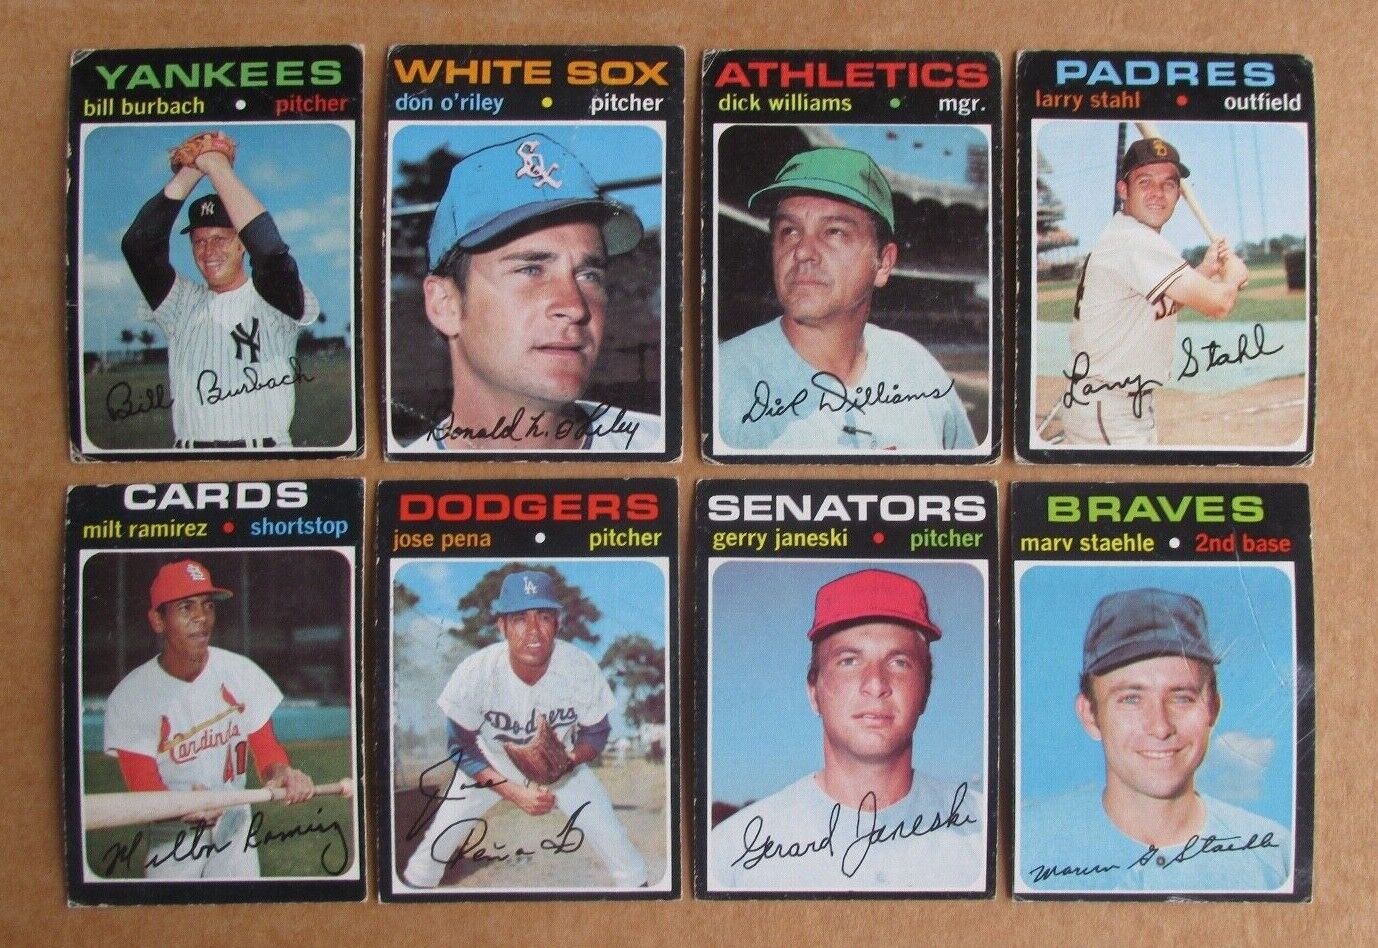 1971 TOPPS BASEBALL MID HIGH SERIES CARD SINGLES COMPLETE YOUR SET UPDATED 4/3